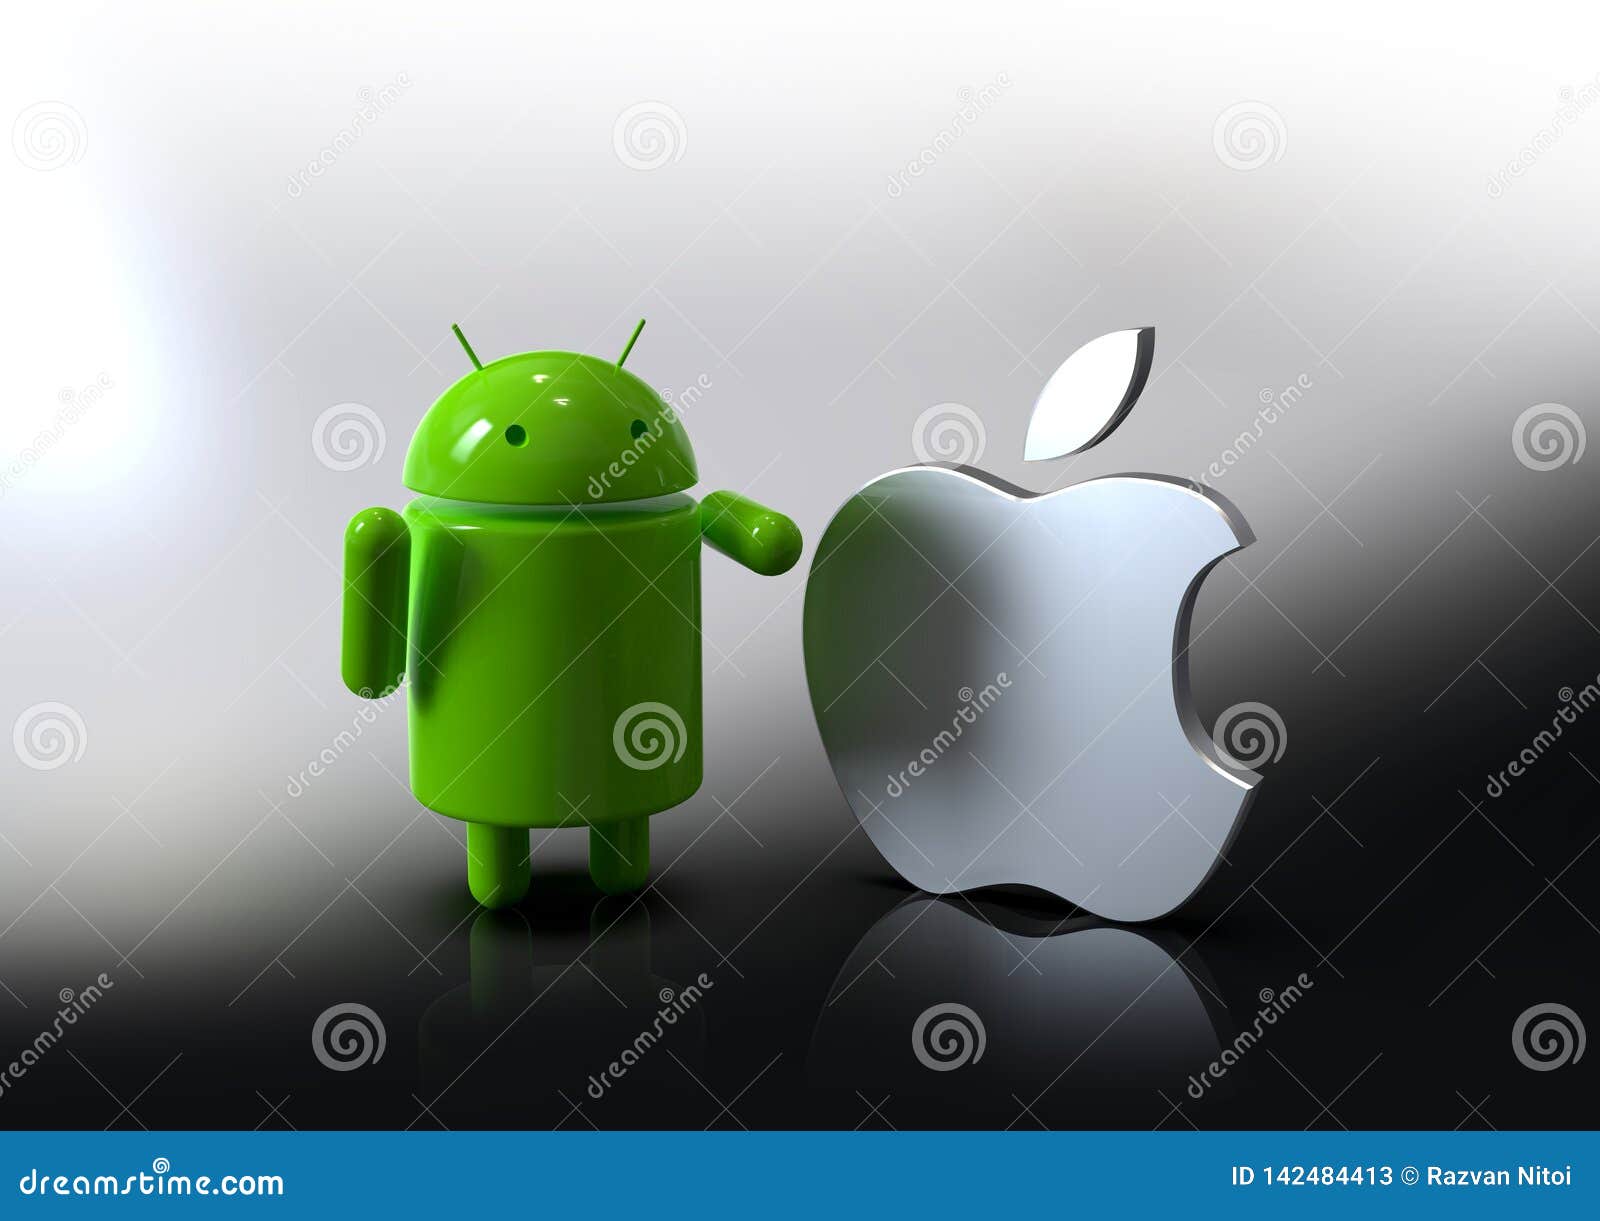 Android and iOS